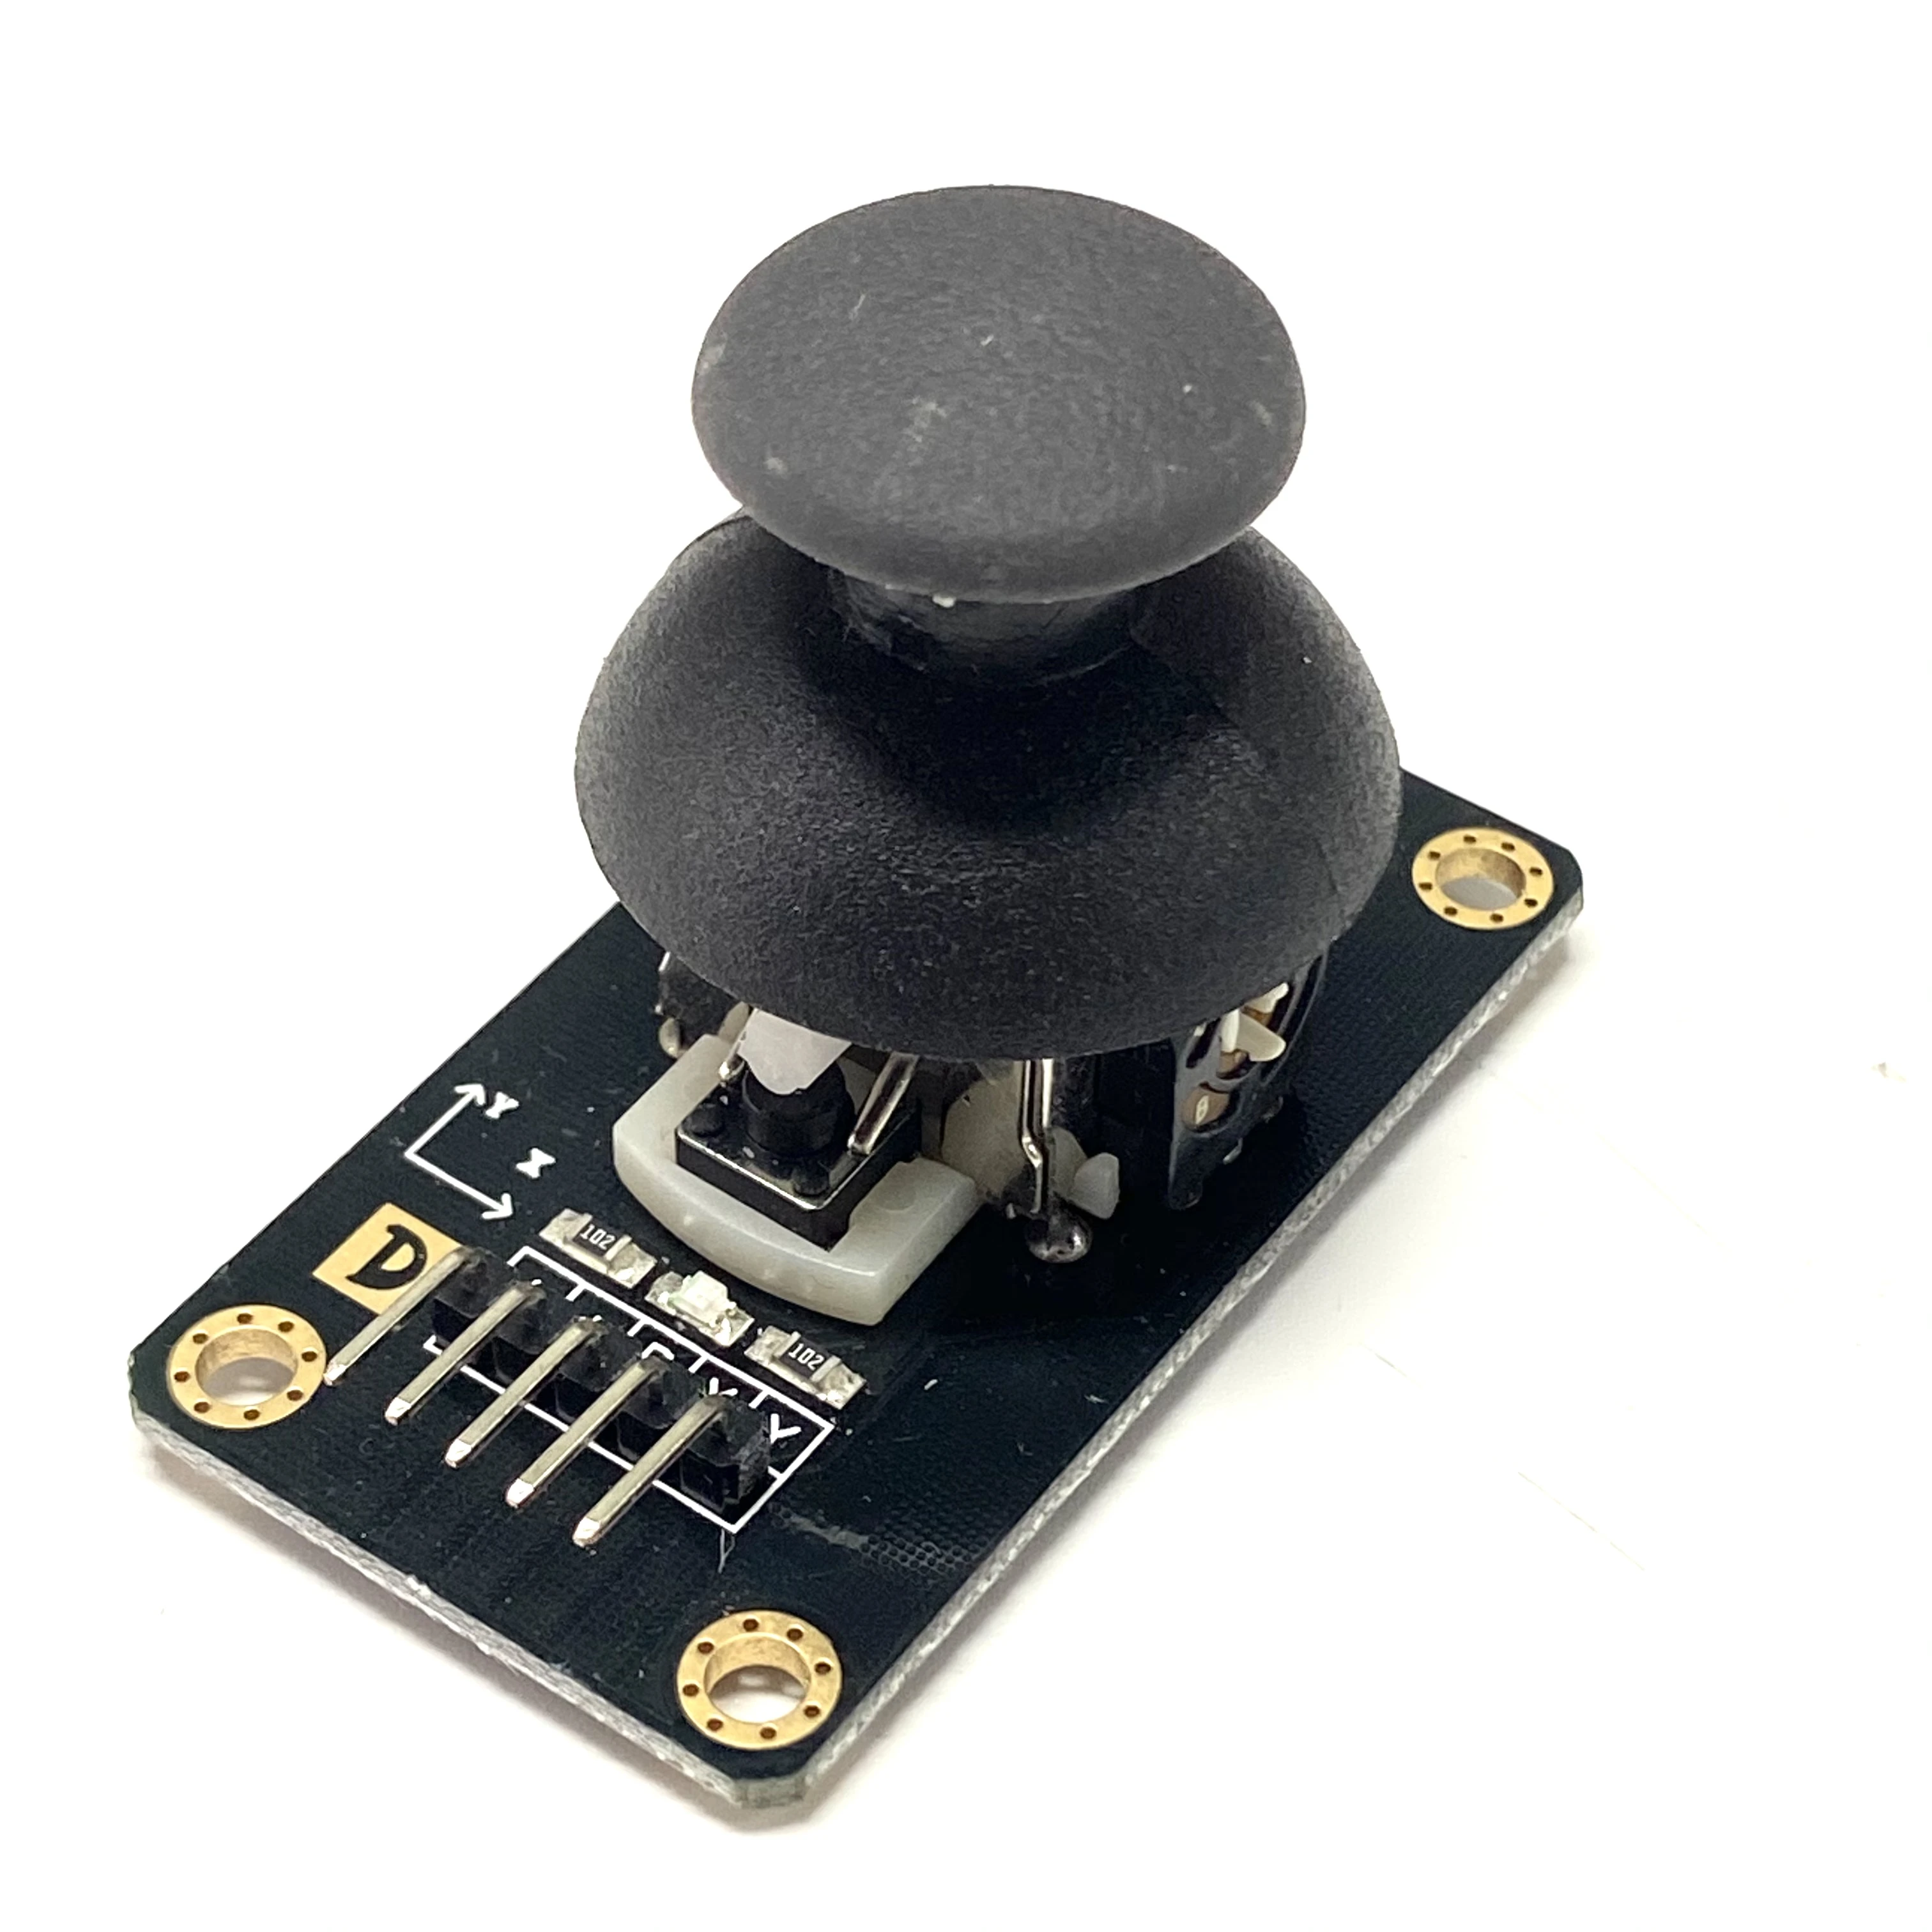 Applicable to R3 PS2 Game Rocker Sensor Module Game Console Accessories - £7.20 GBP